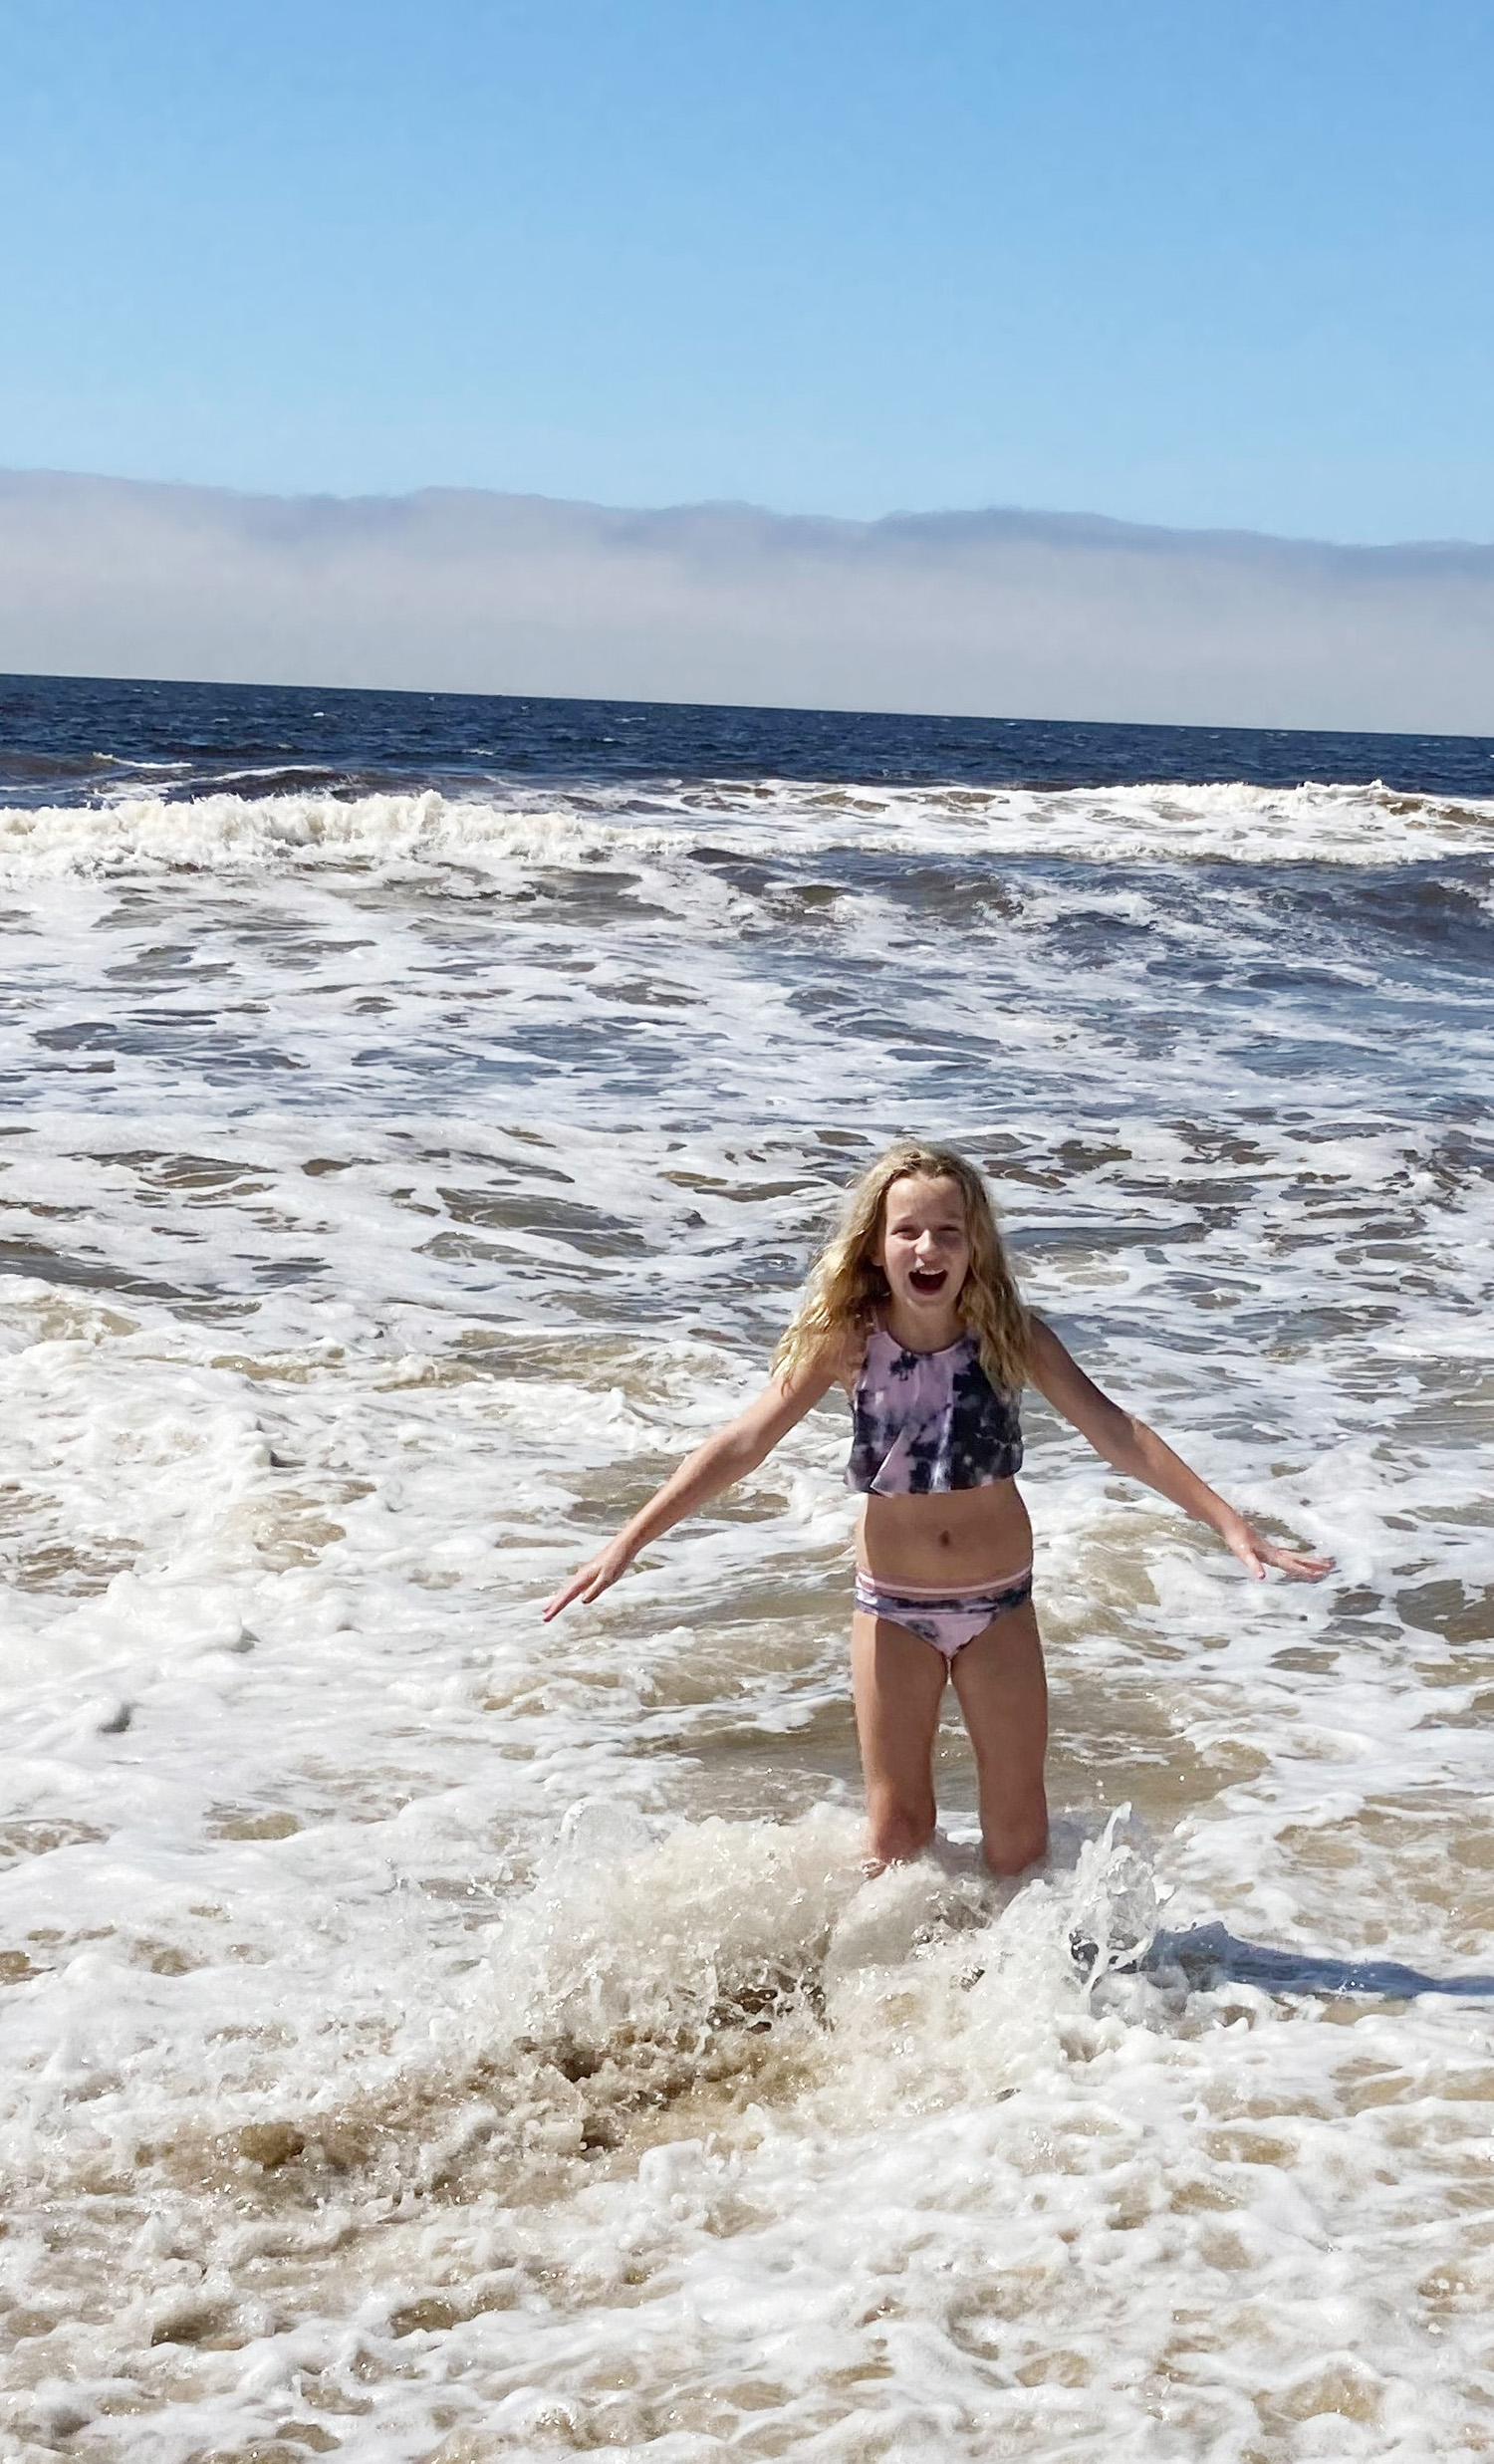 PHOTO: Haylee Whiting, 10, of Texas, plays in the ocean off the coast of California.